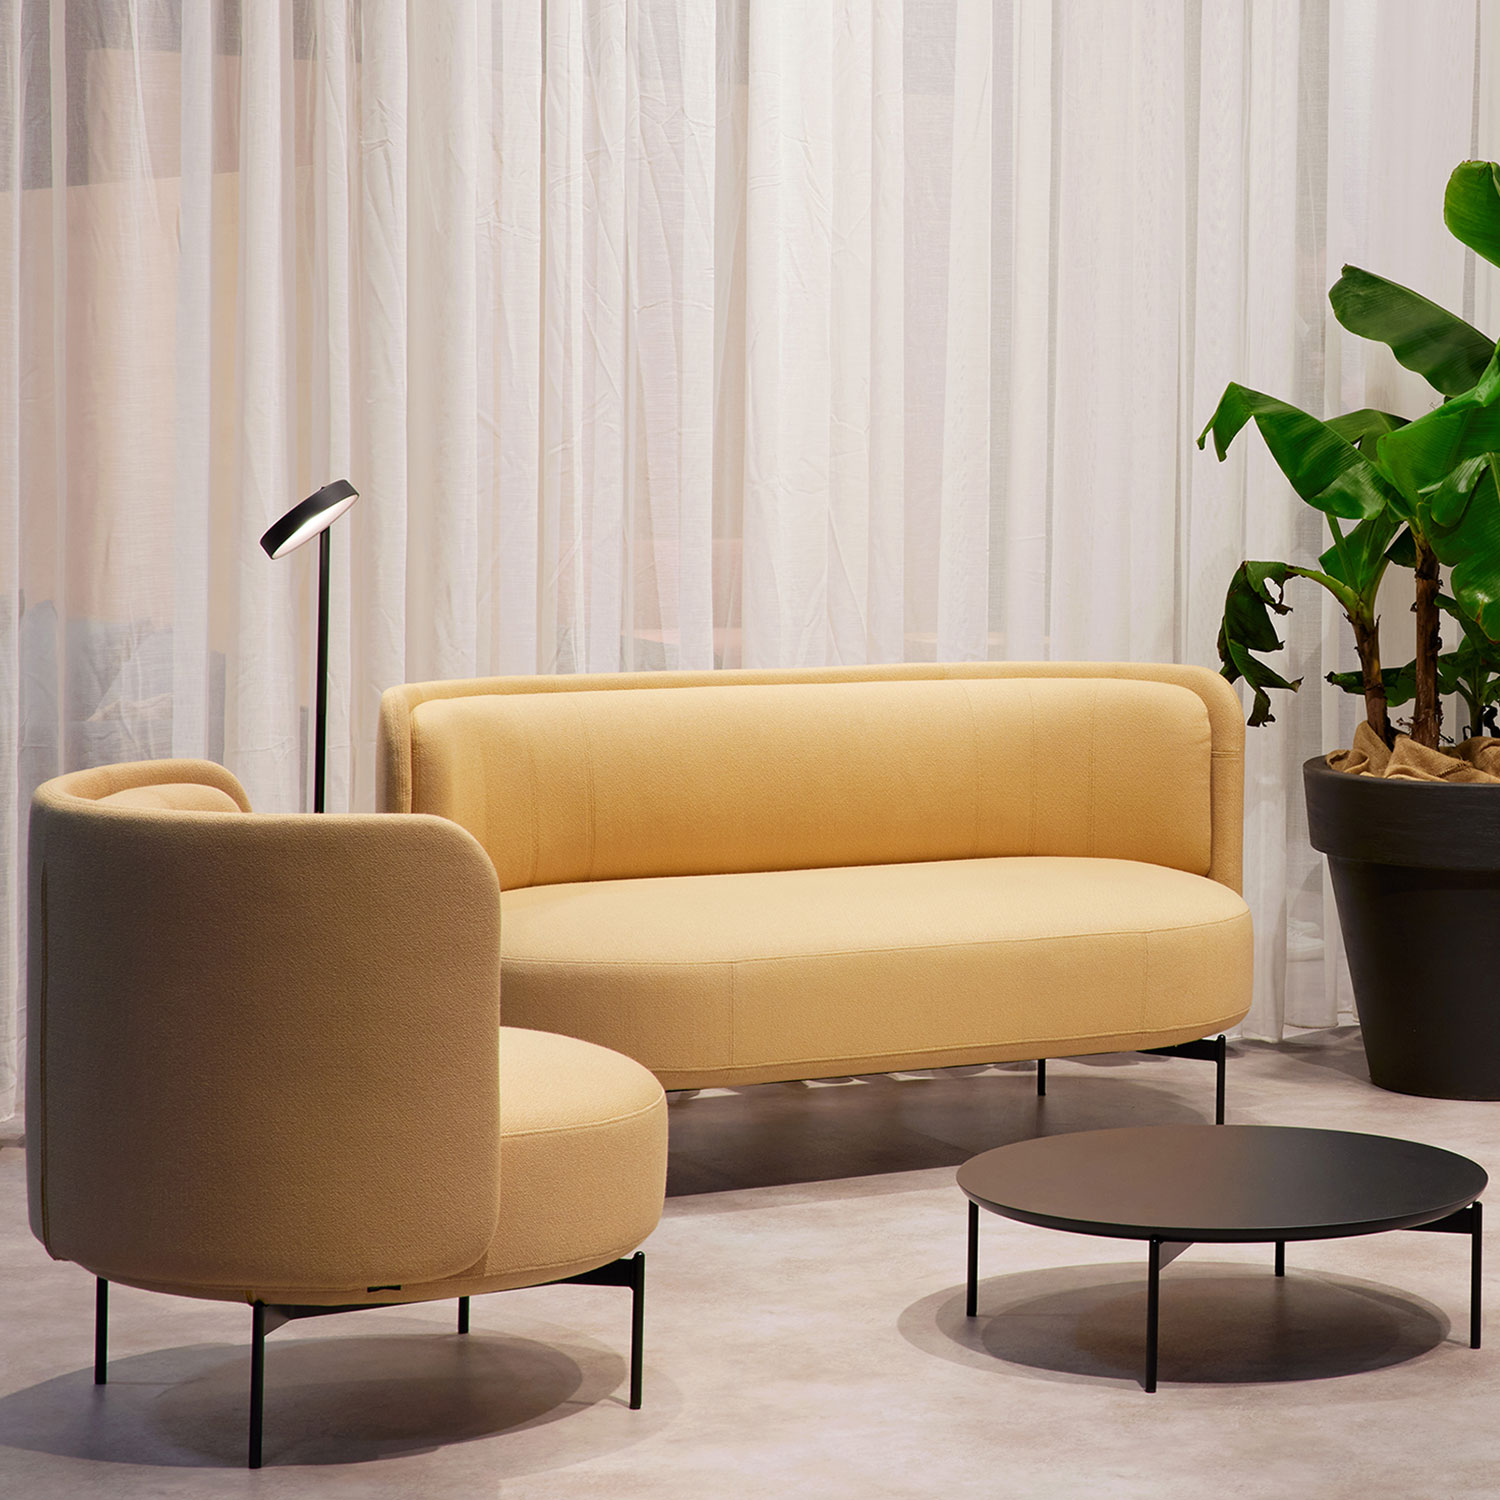 JOE Seating Collection by Böttcher & Kayser for Softline